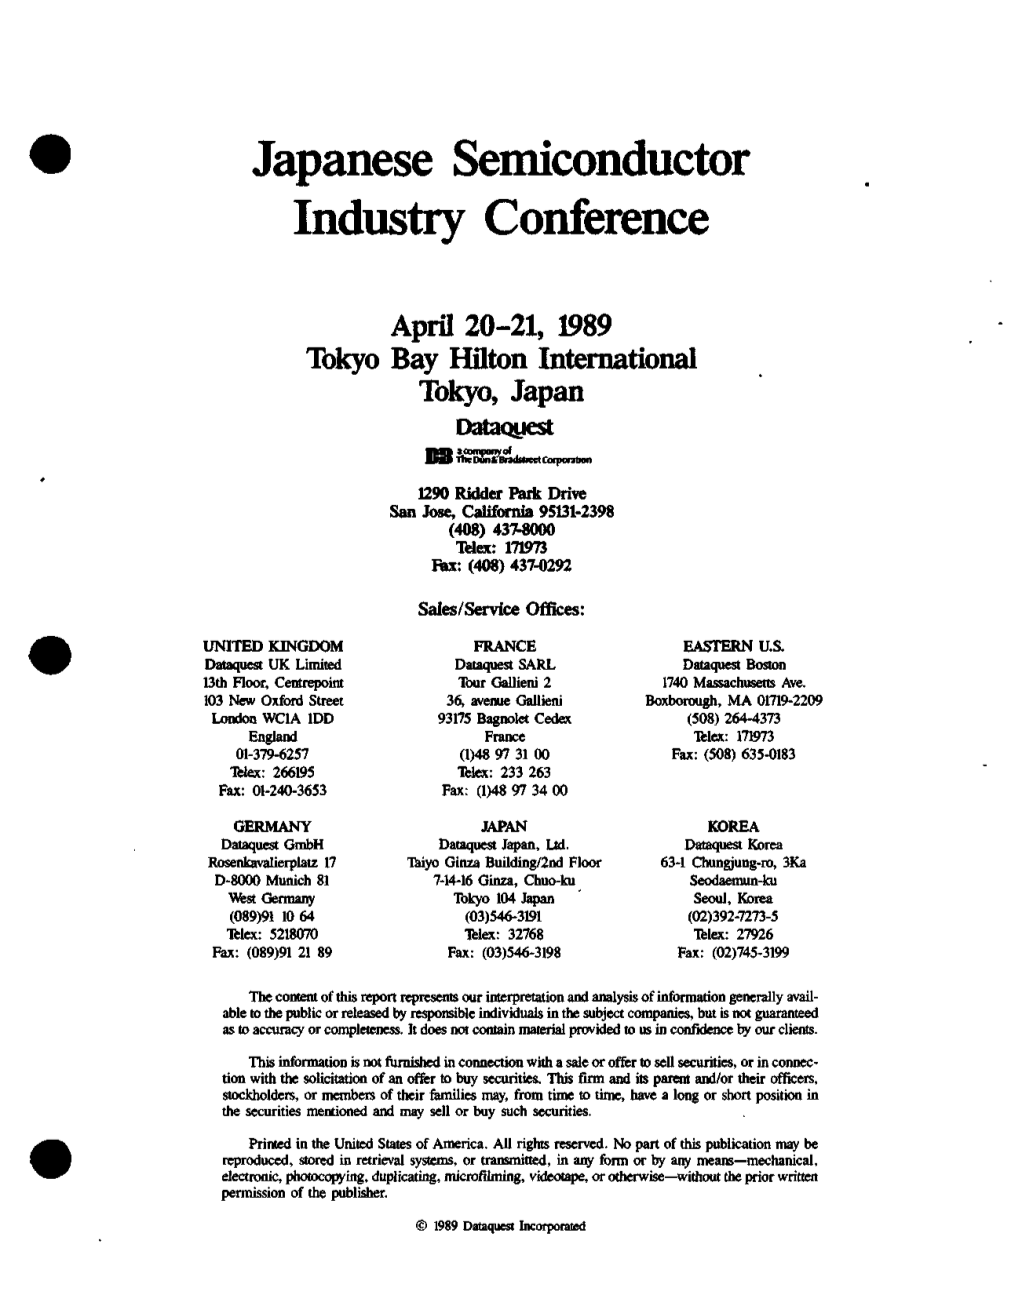 Japanese Semiconductor Industry Conference, 1989